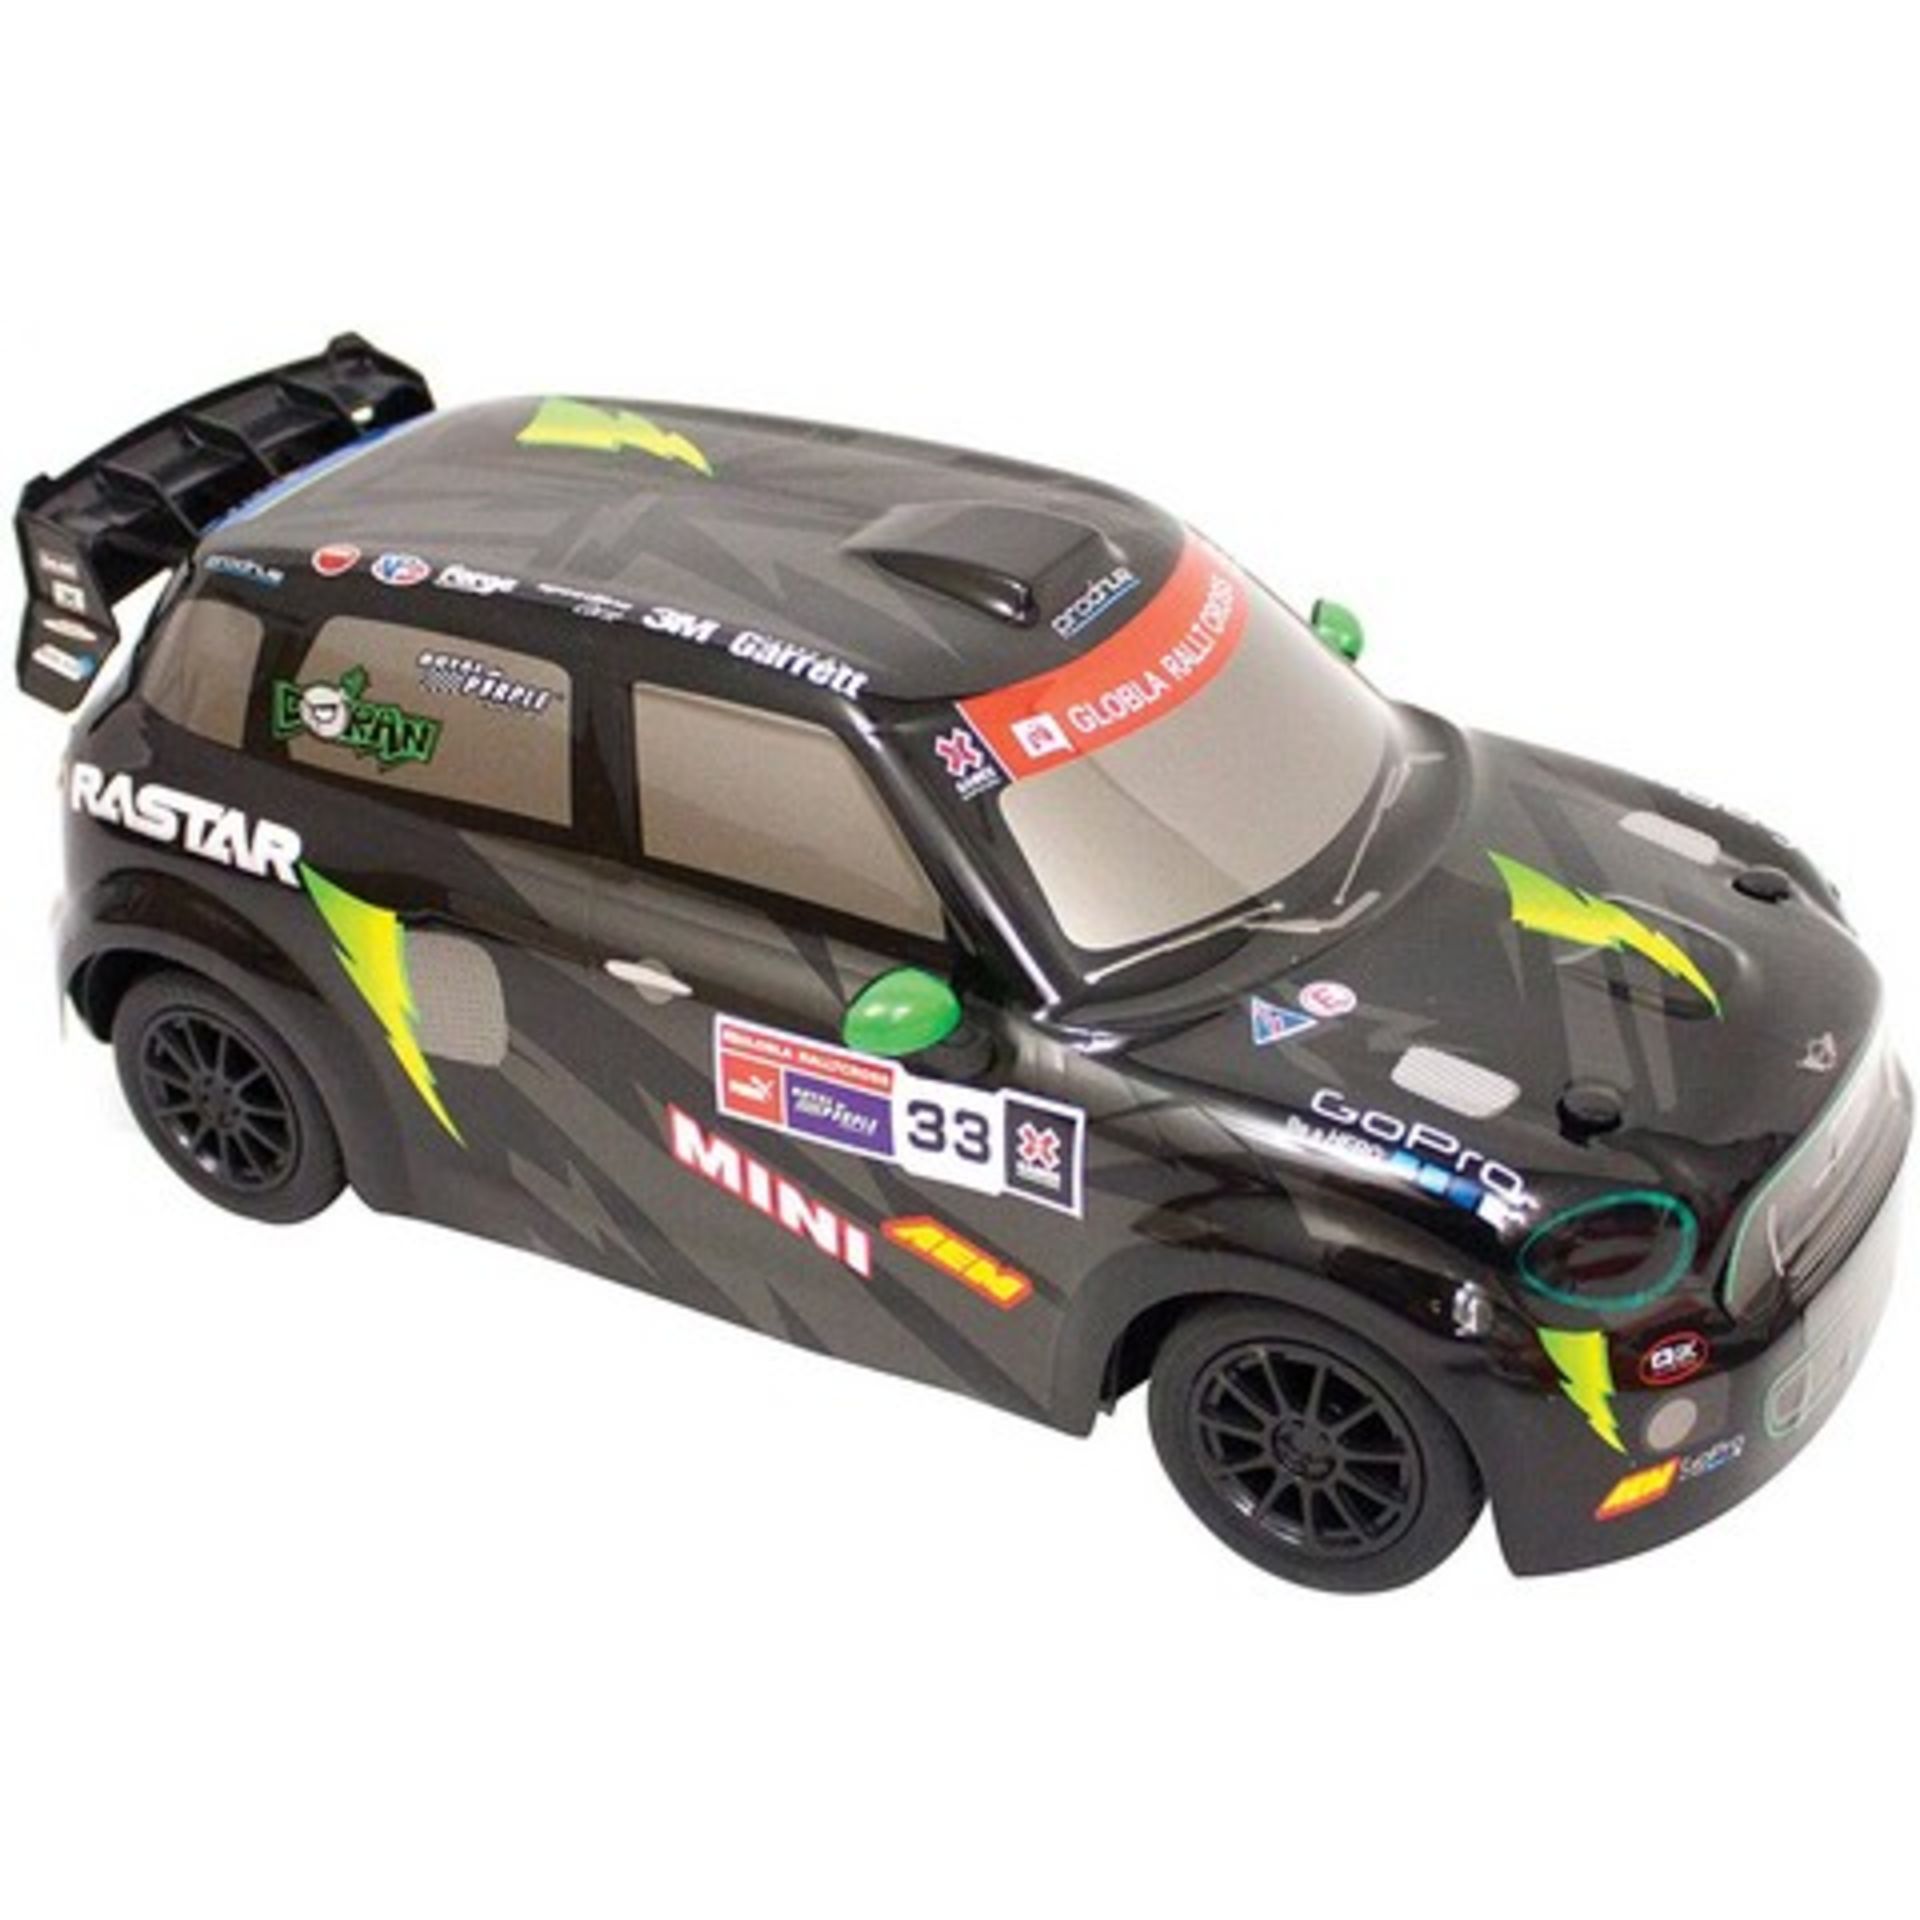 V Brand New R/C 1:14 Scale Mini Countryman JCW RX - Amazon Price £49.95 - Colours May Vary